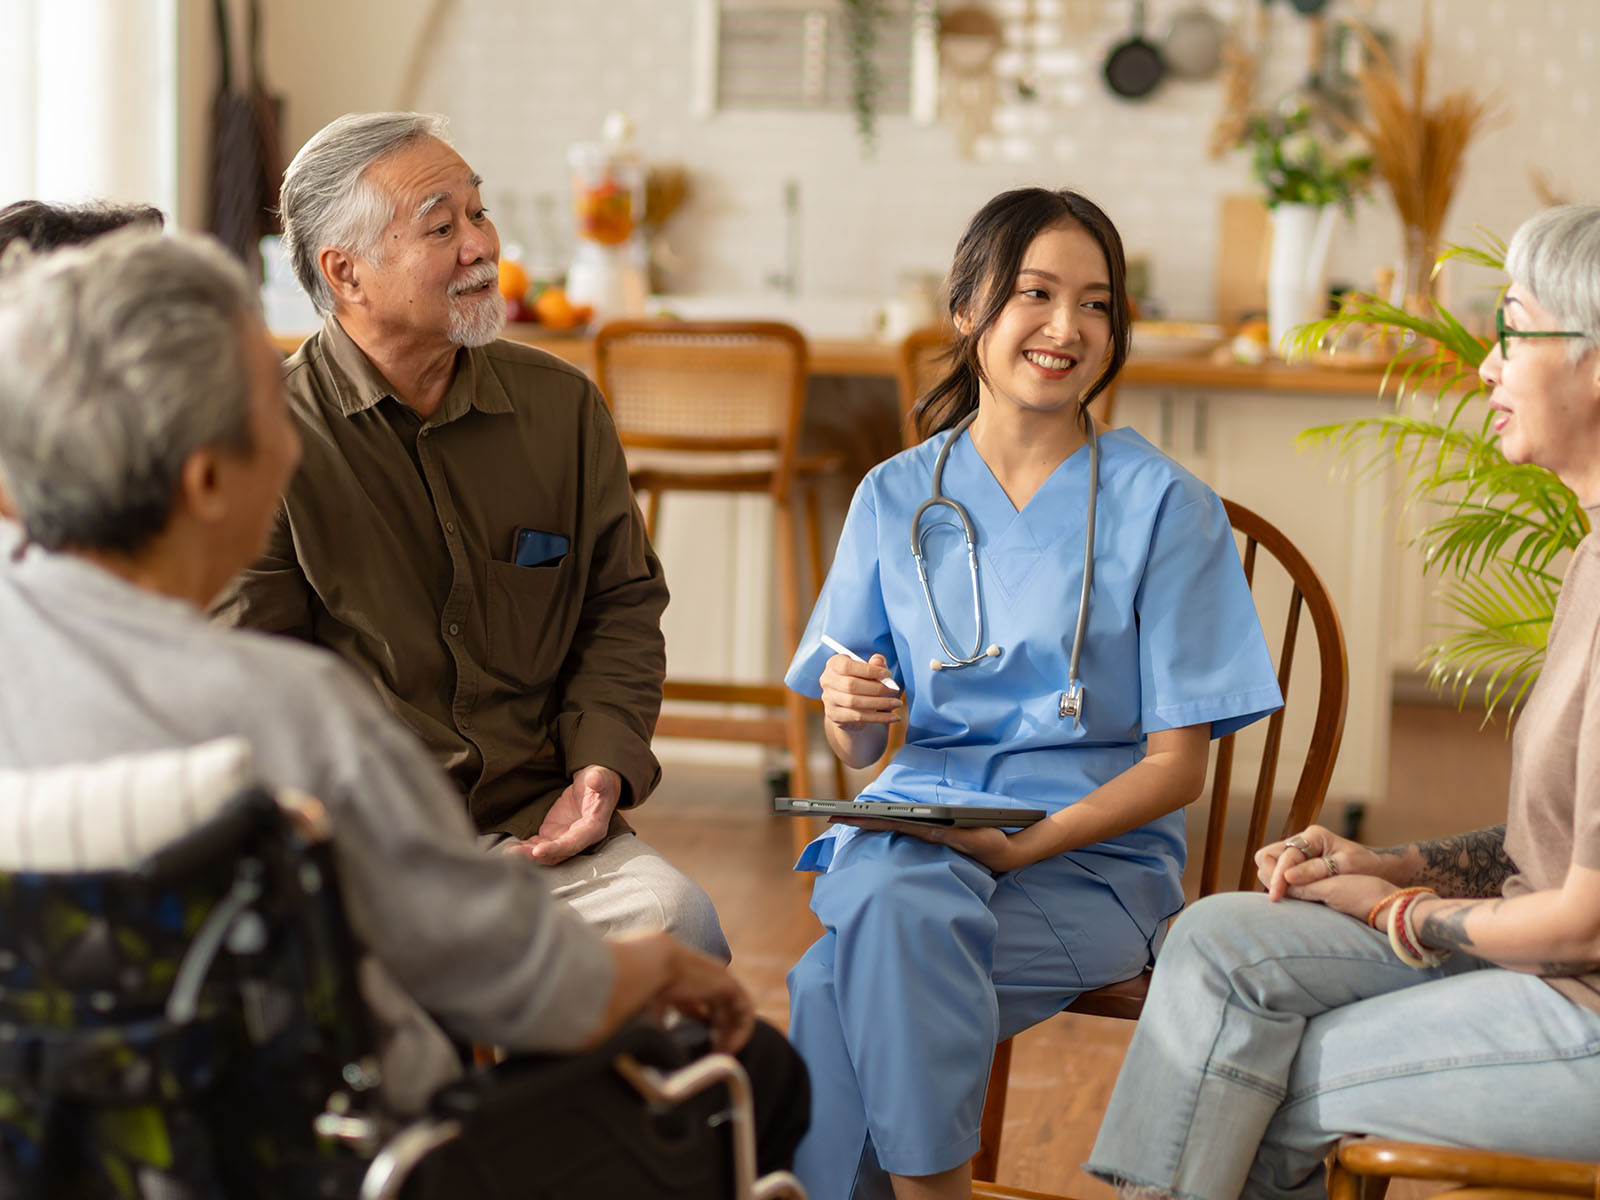 Provider talking with patient group